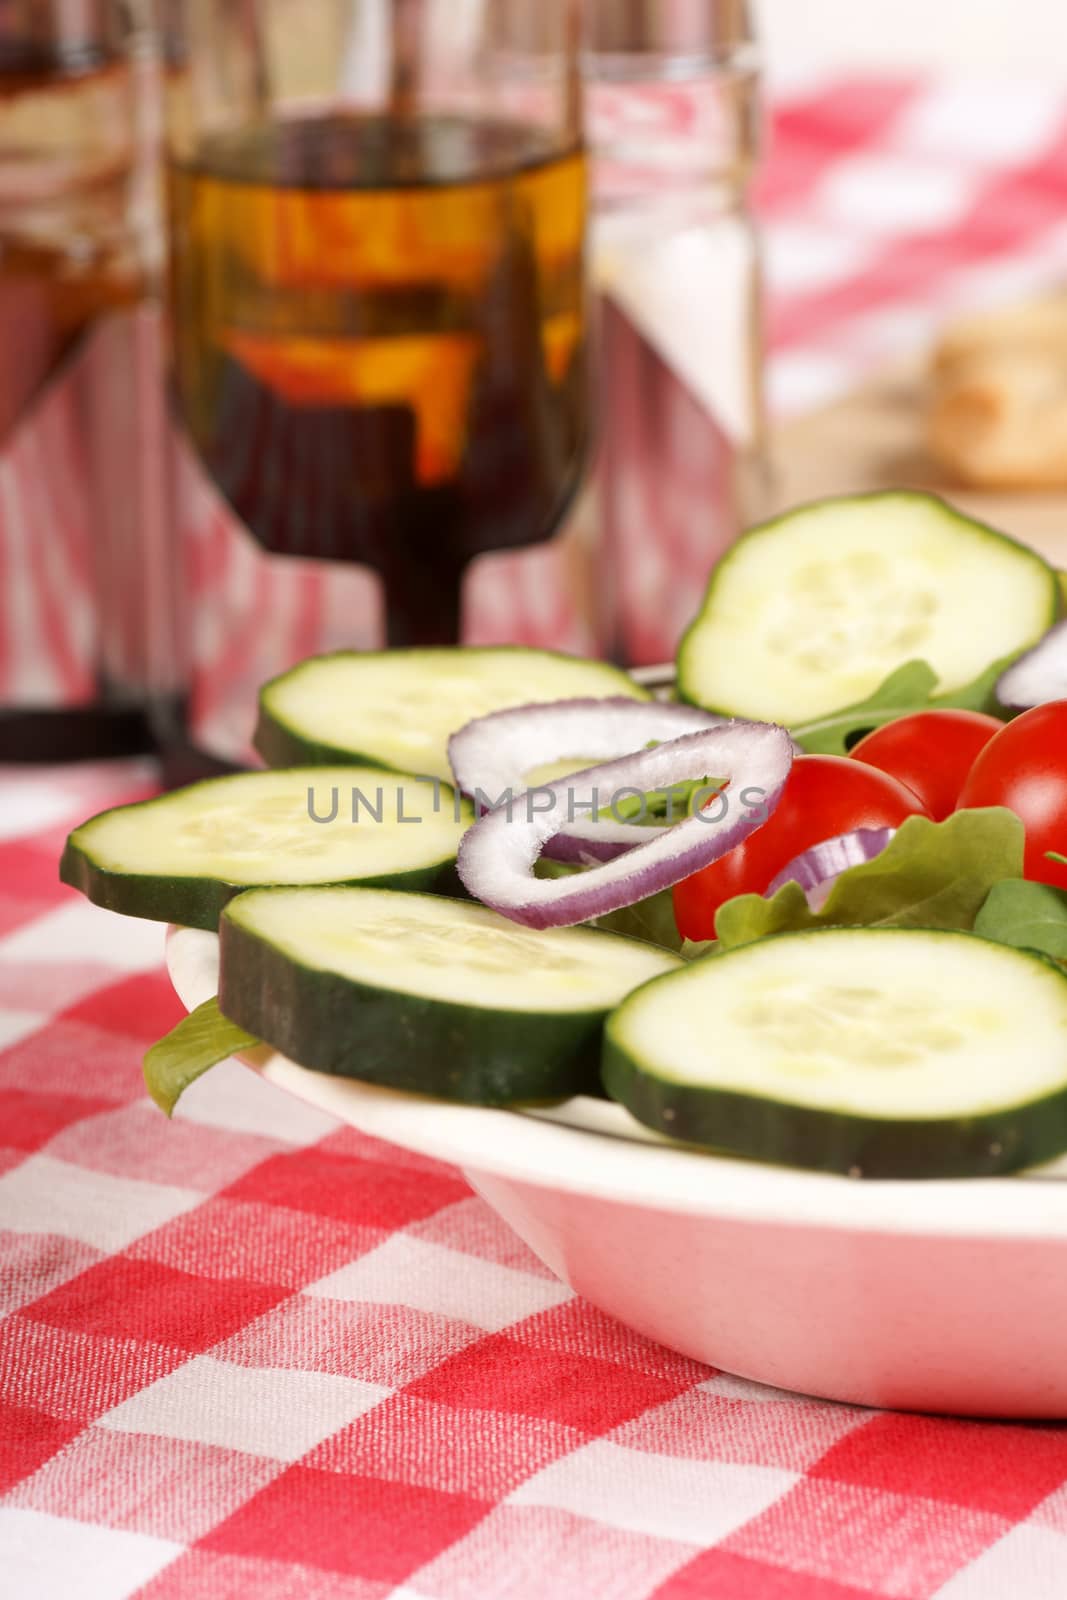 Mixed salad on a set table by citylights